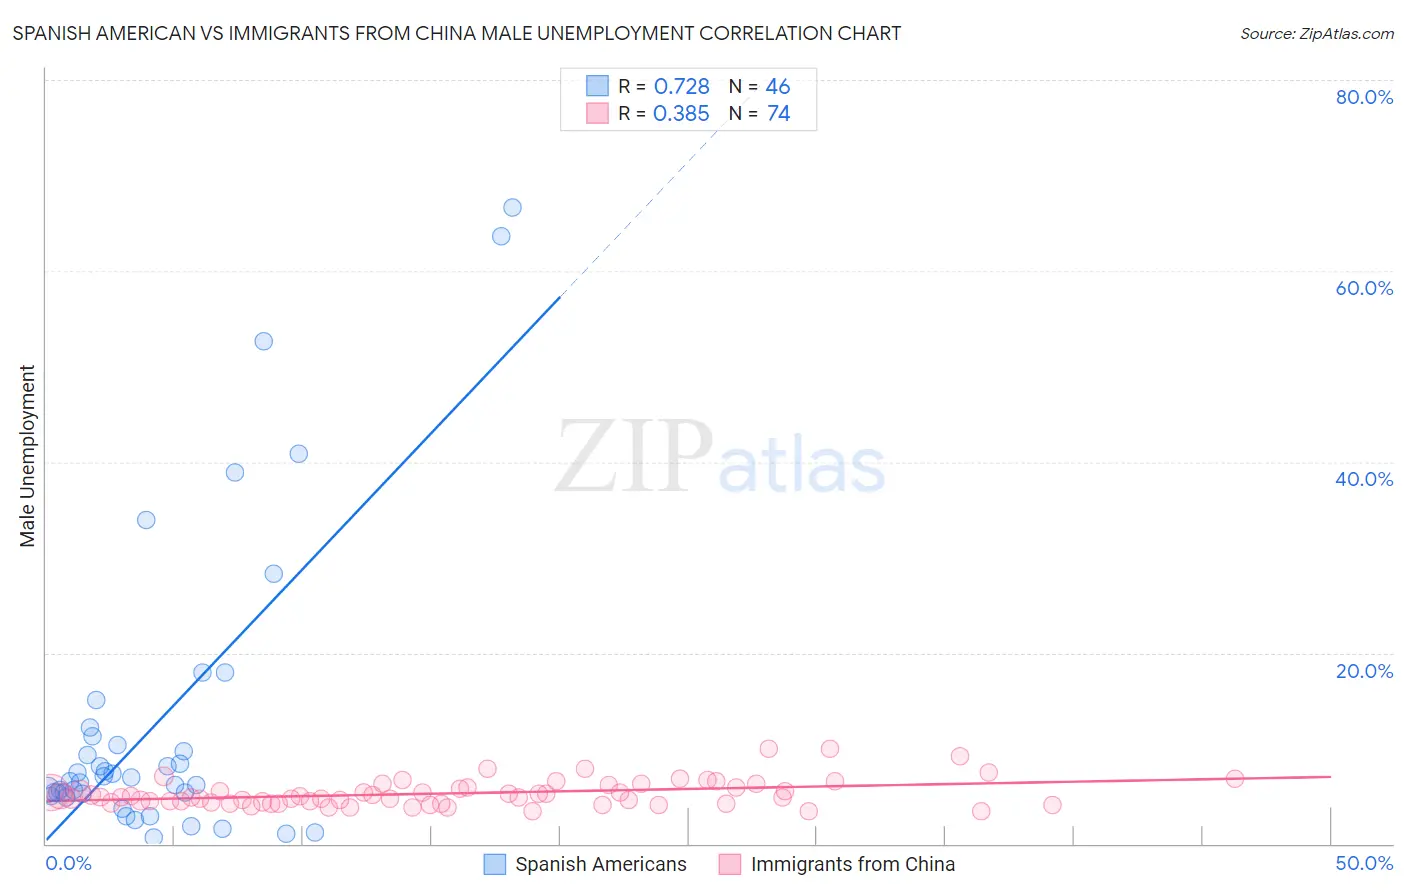 Spanish American vs Immigrants from China Male Unemployment